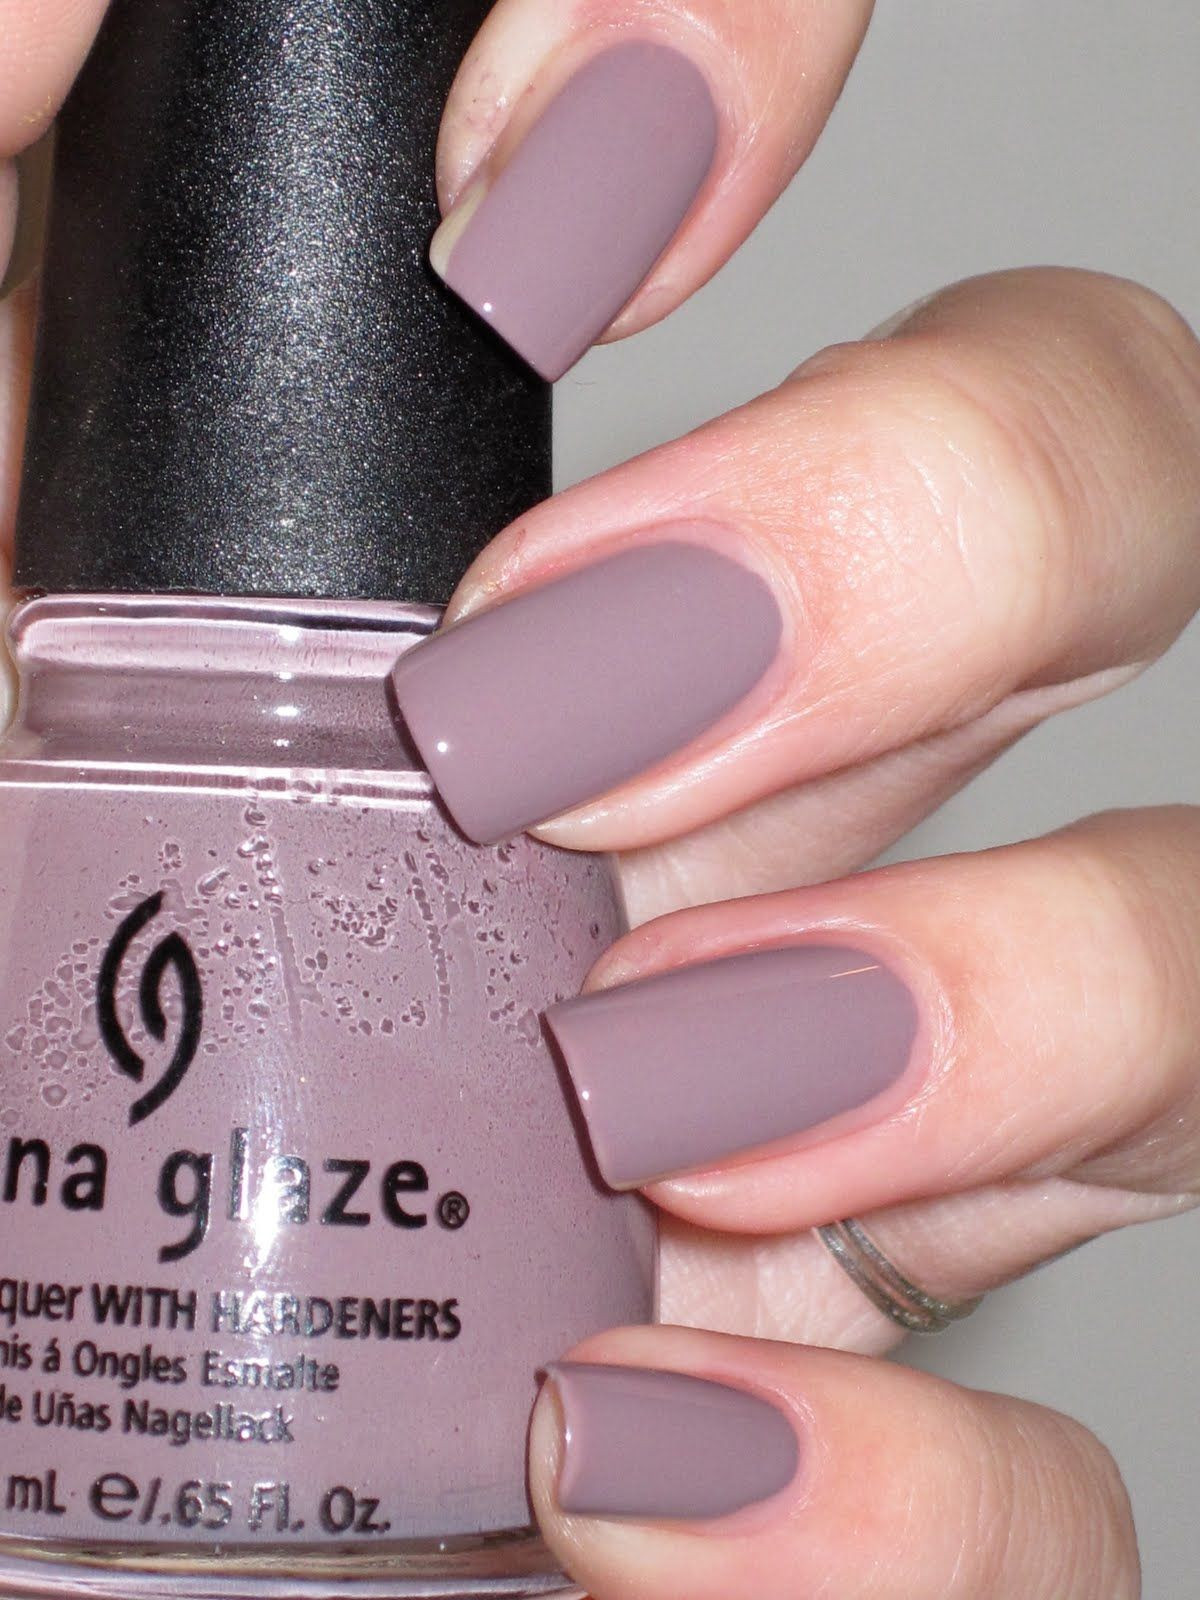 Winter Nail Colors For Pale Skin
 China Glaze Channelesque My favorite color just the